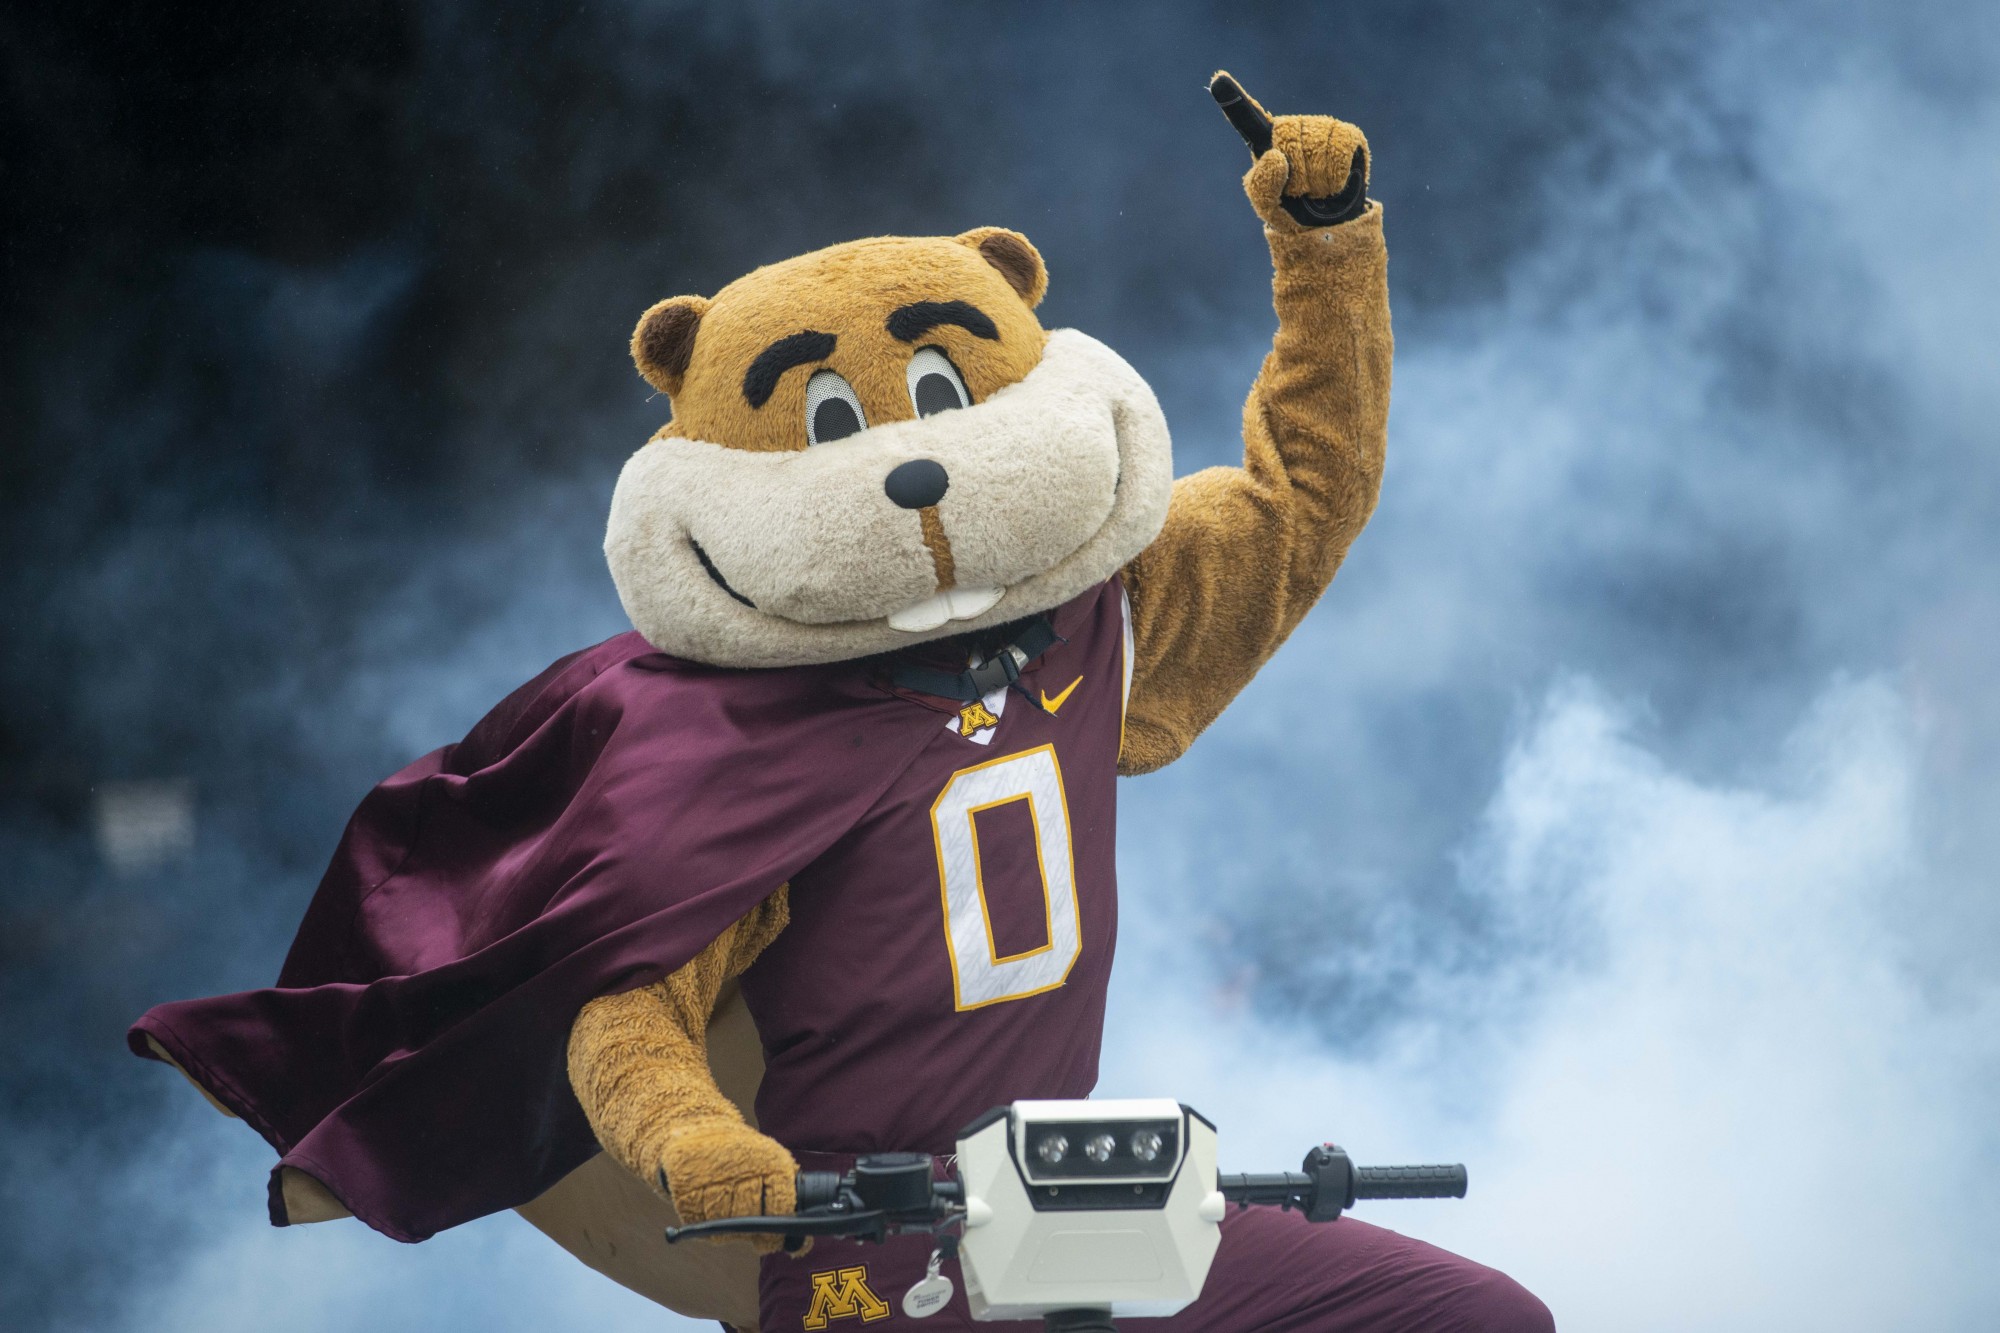 Goldy makes his field entrance during the Gopher game against the Badgers at TCF Bank Stadium on Saturday, Nov. 30. 